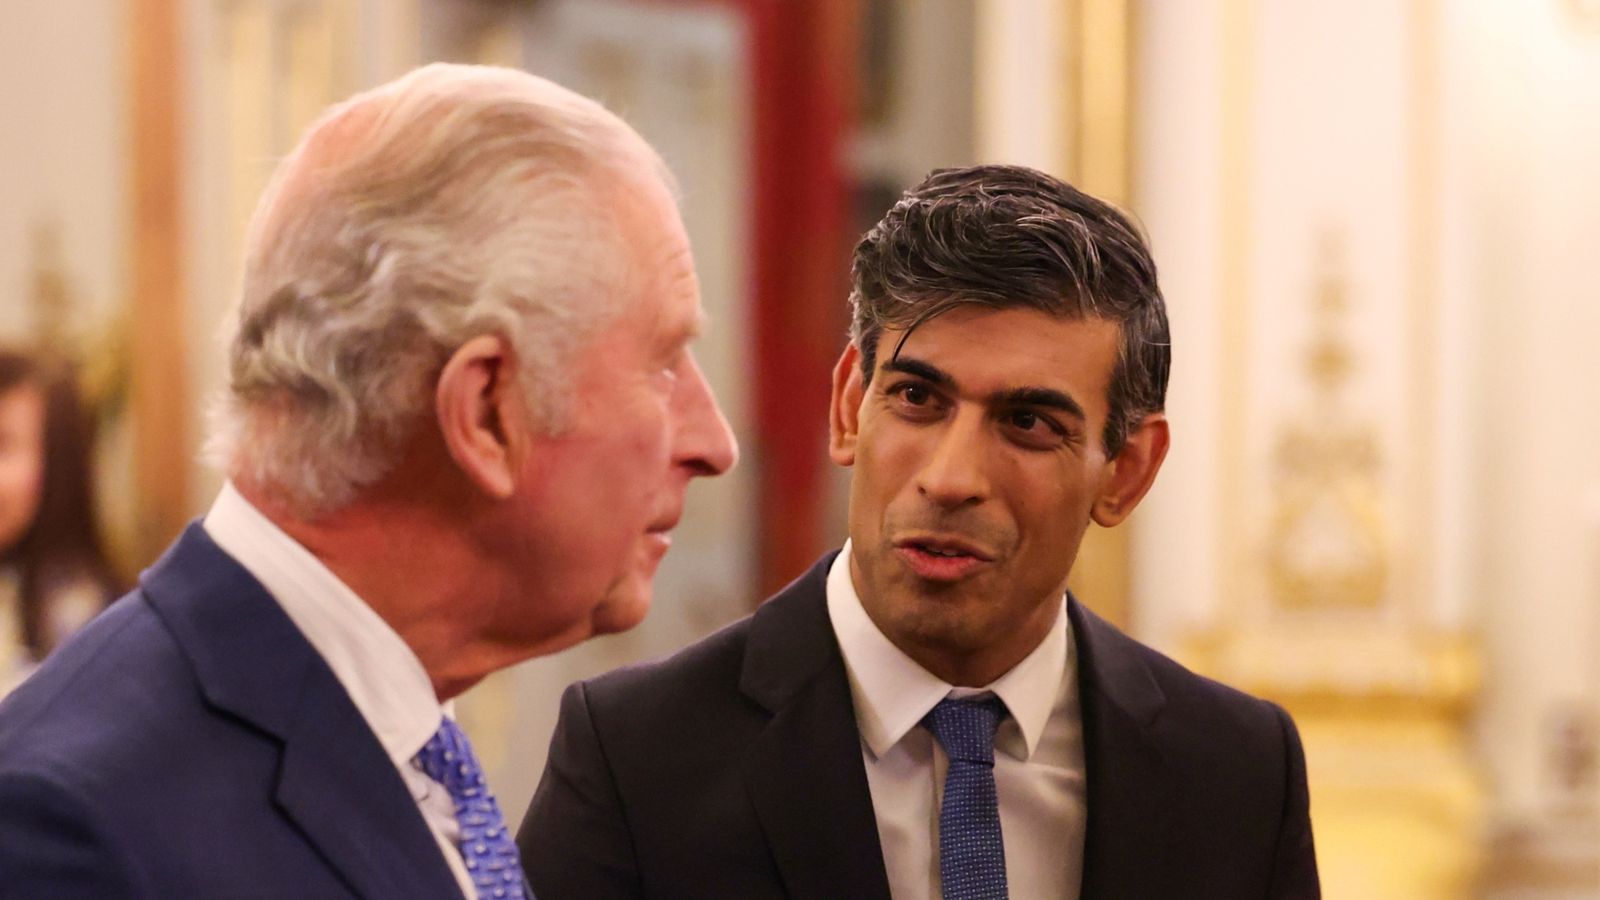 Rishi Sunak criticised for 'surprise' honours list including major Tory